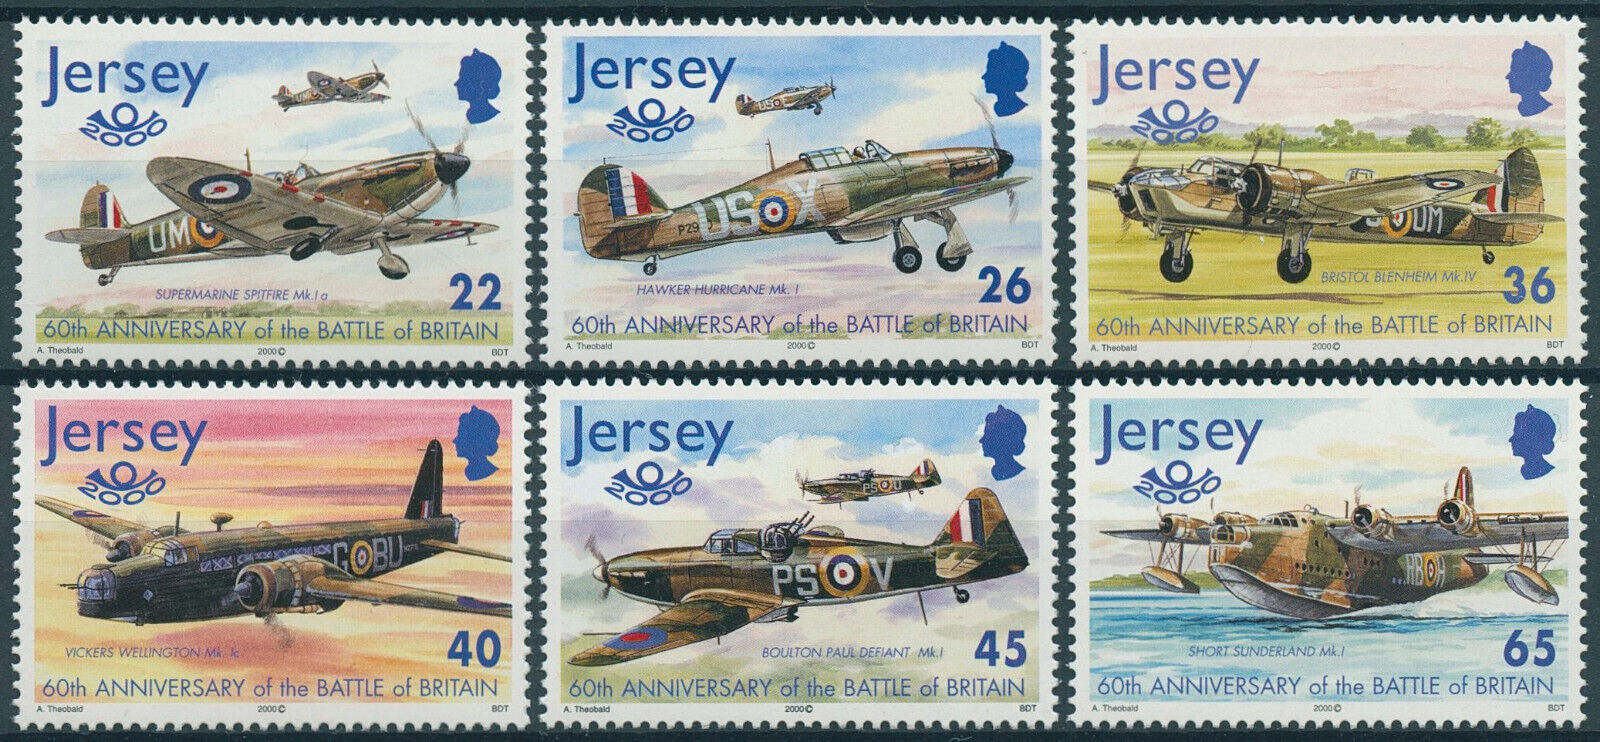 Jersey 2000 MNH Military Stamps WWII WW2 Battle of Britain Aviation 6v Set